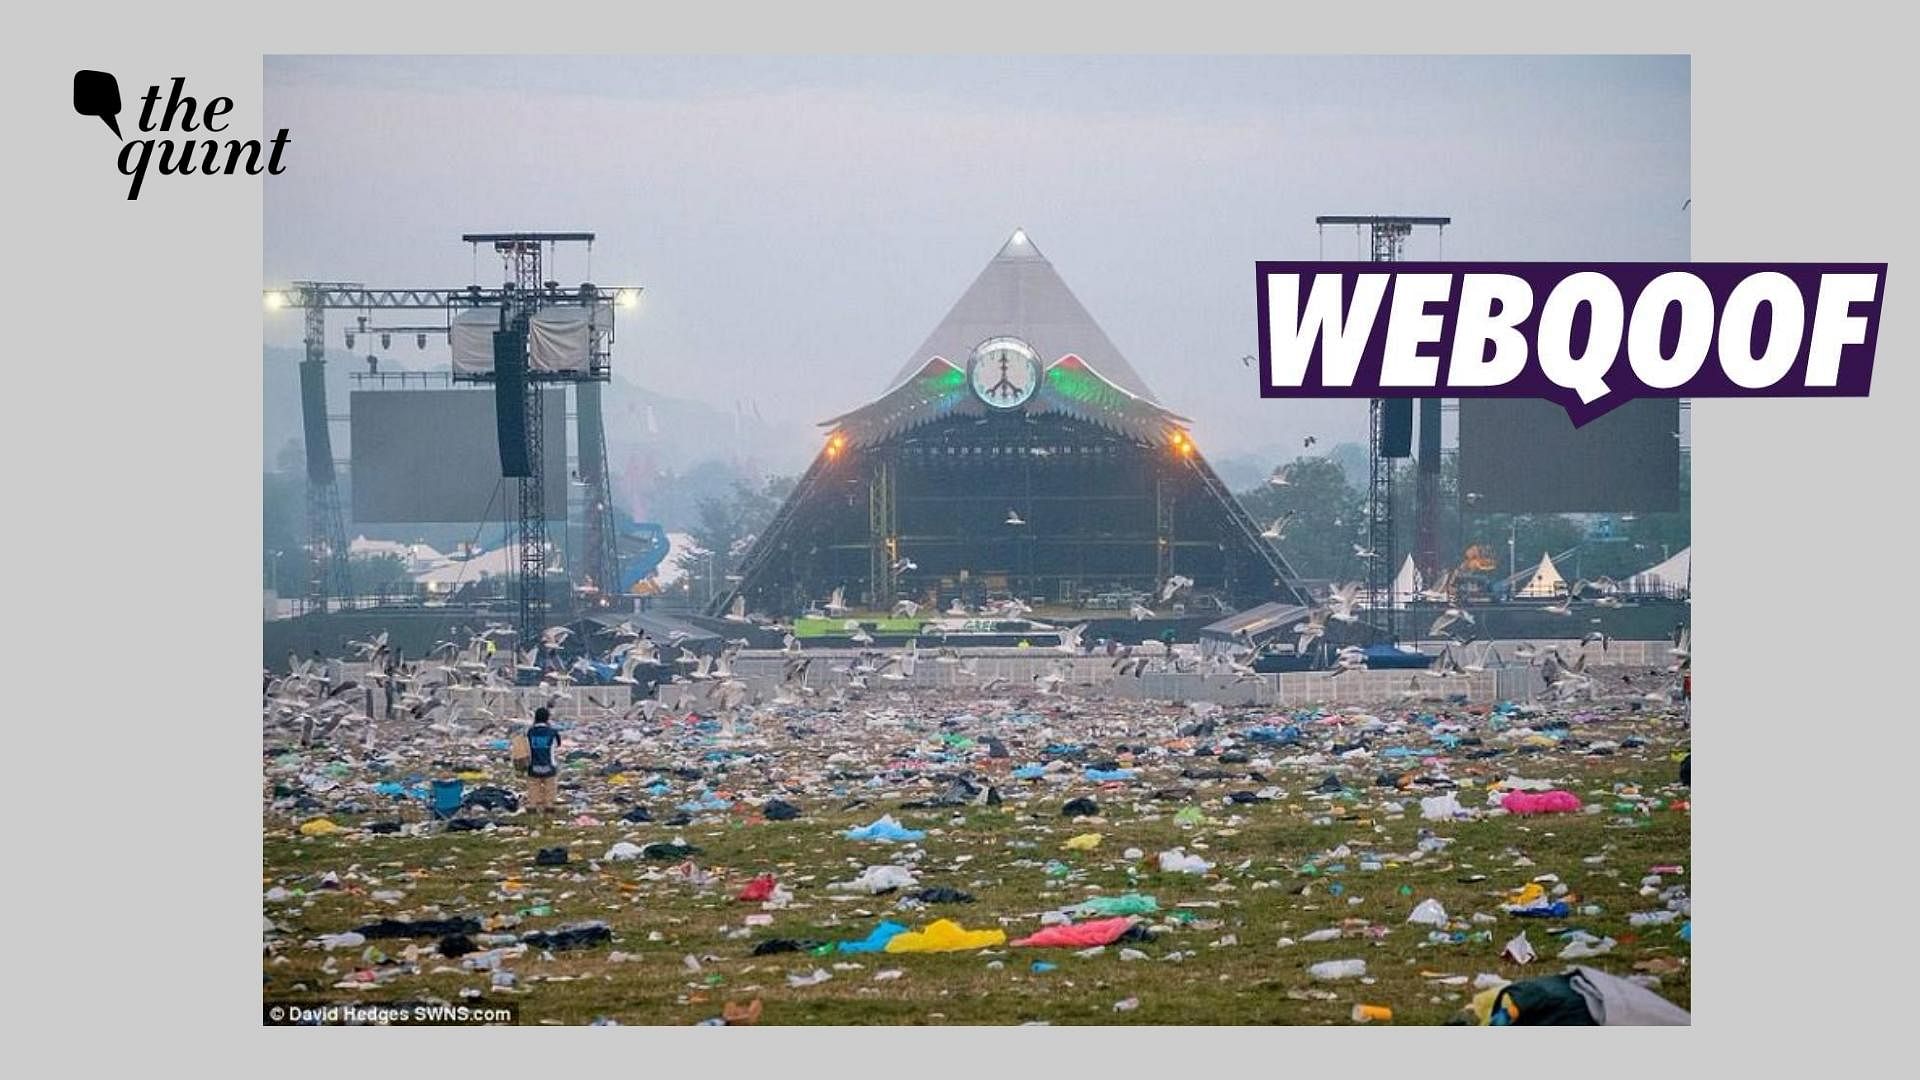 <div class="paragraphs"><p>The claim states that it shows the pyramid stage at Glastonbury after Greta Thunberg's environmental speech.</p></div>